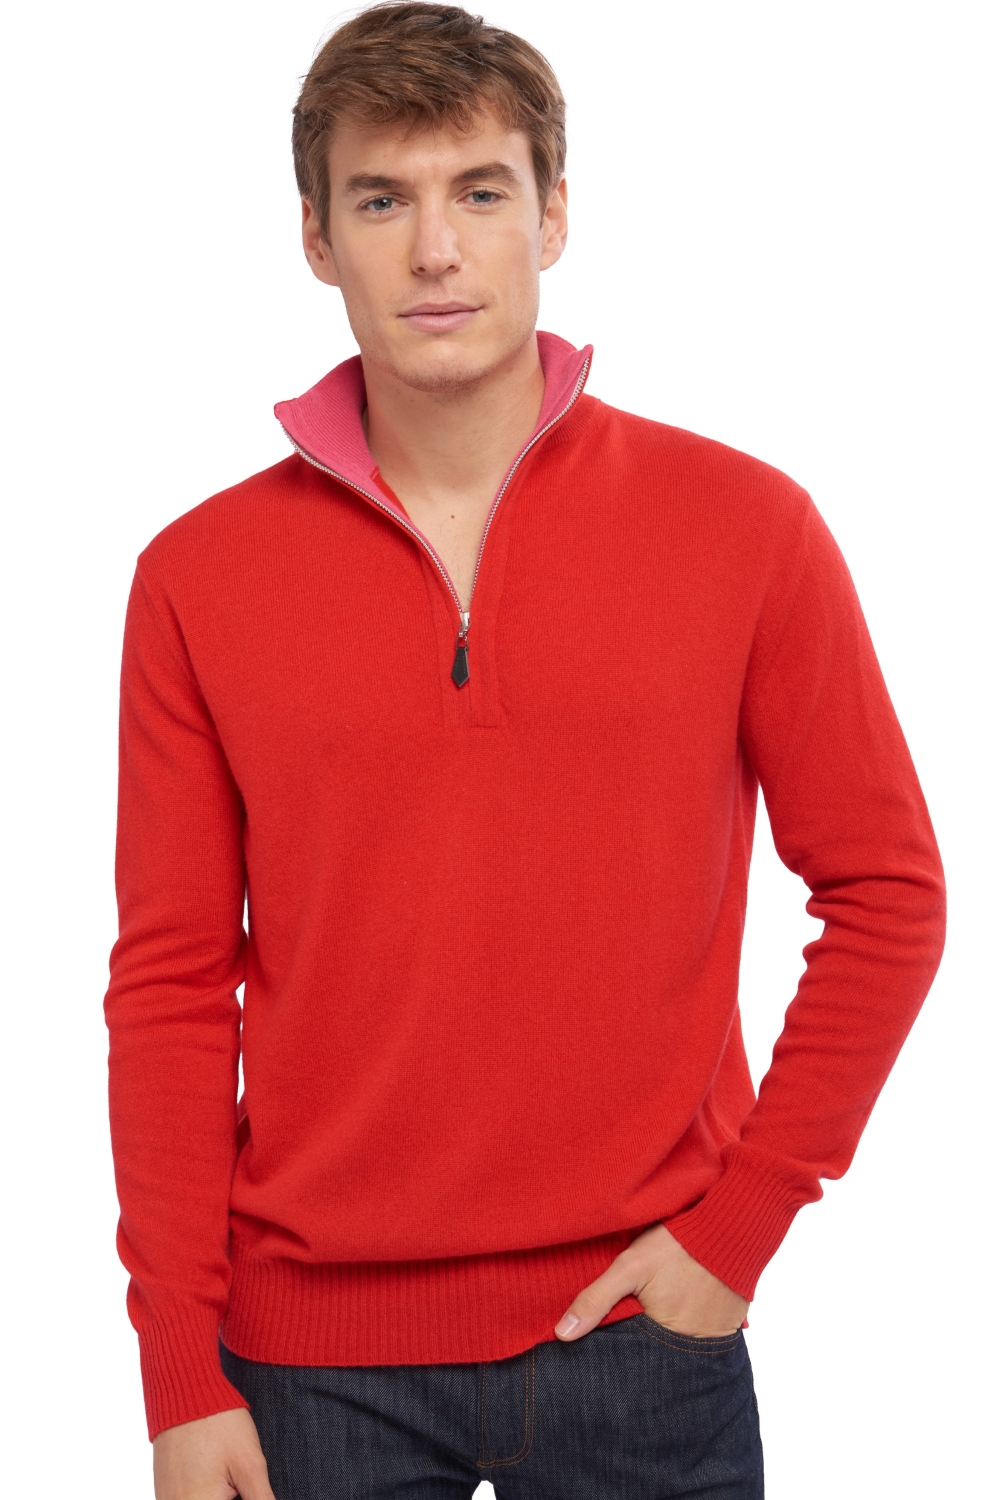 Cashmere men polo style sweaters henri rouge shocking pink 3xl